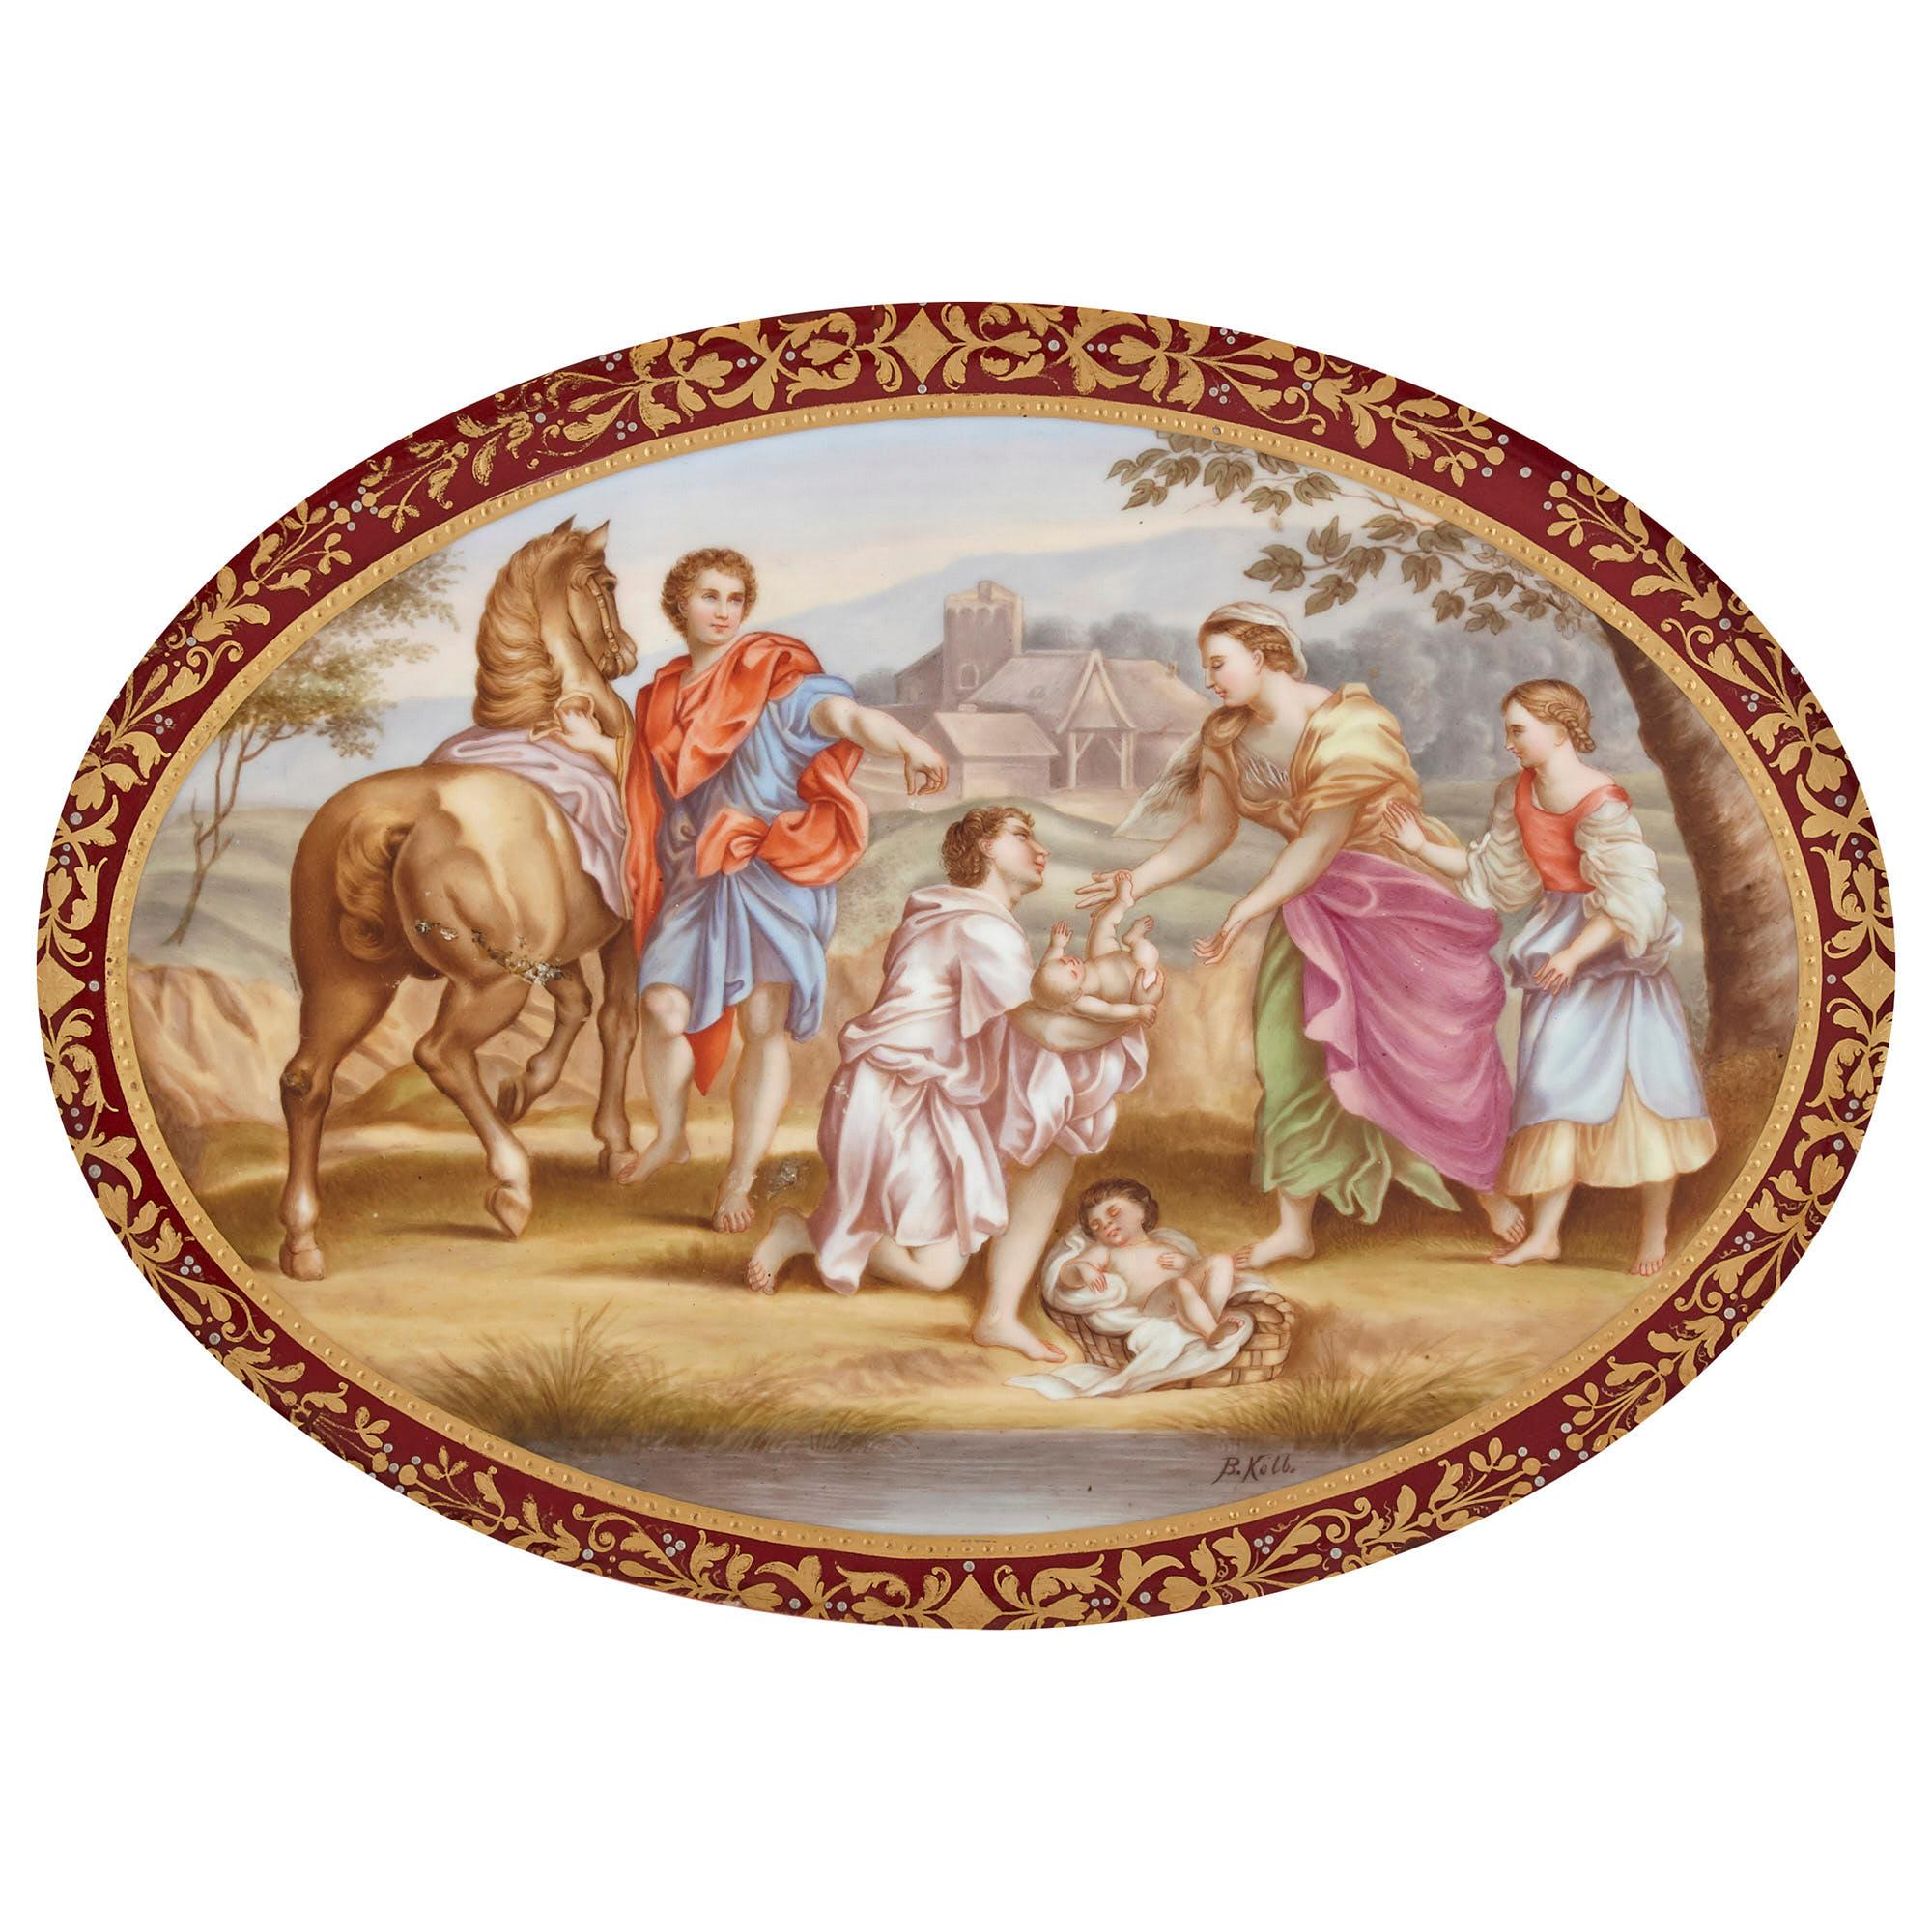 19th century oval porcelain plaque by Royal Vienna
Austrian, 19th century
Measures: Frame: Height 43cm, width 52cm, depth 2cm
Plaque: Height 24cm, width 34cm, depth 0.5cm

This beautiful porcelain plaque is contained within an ornate pierced